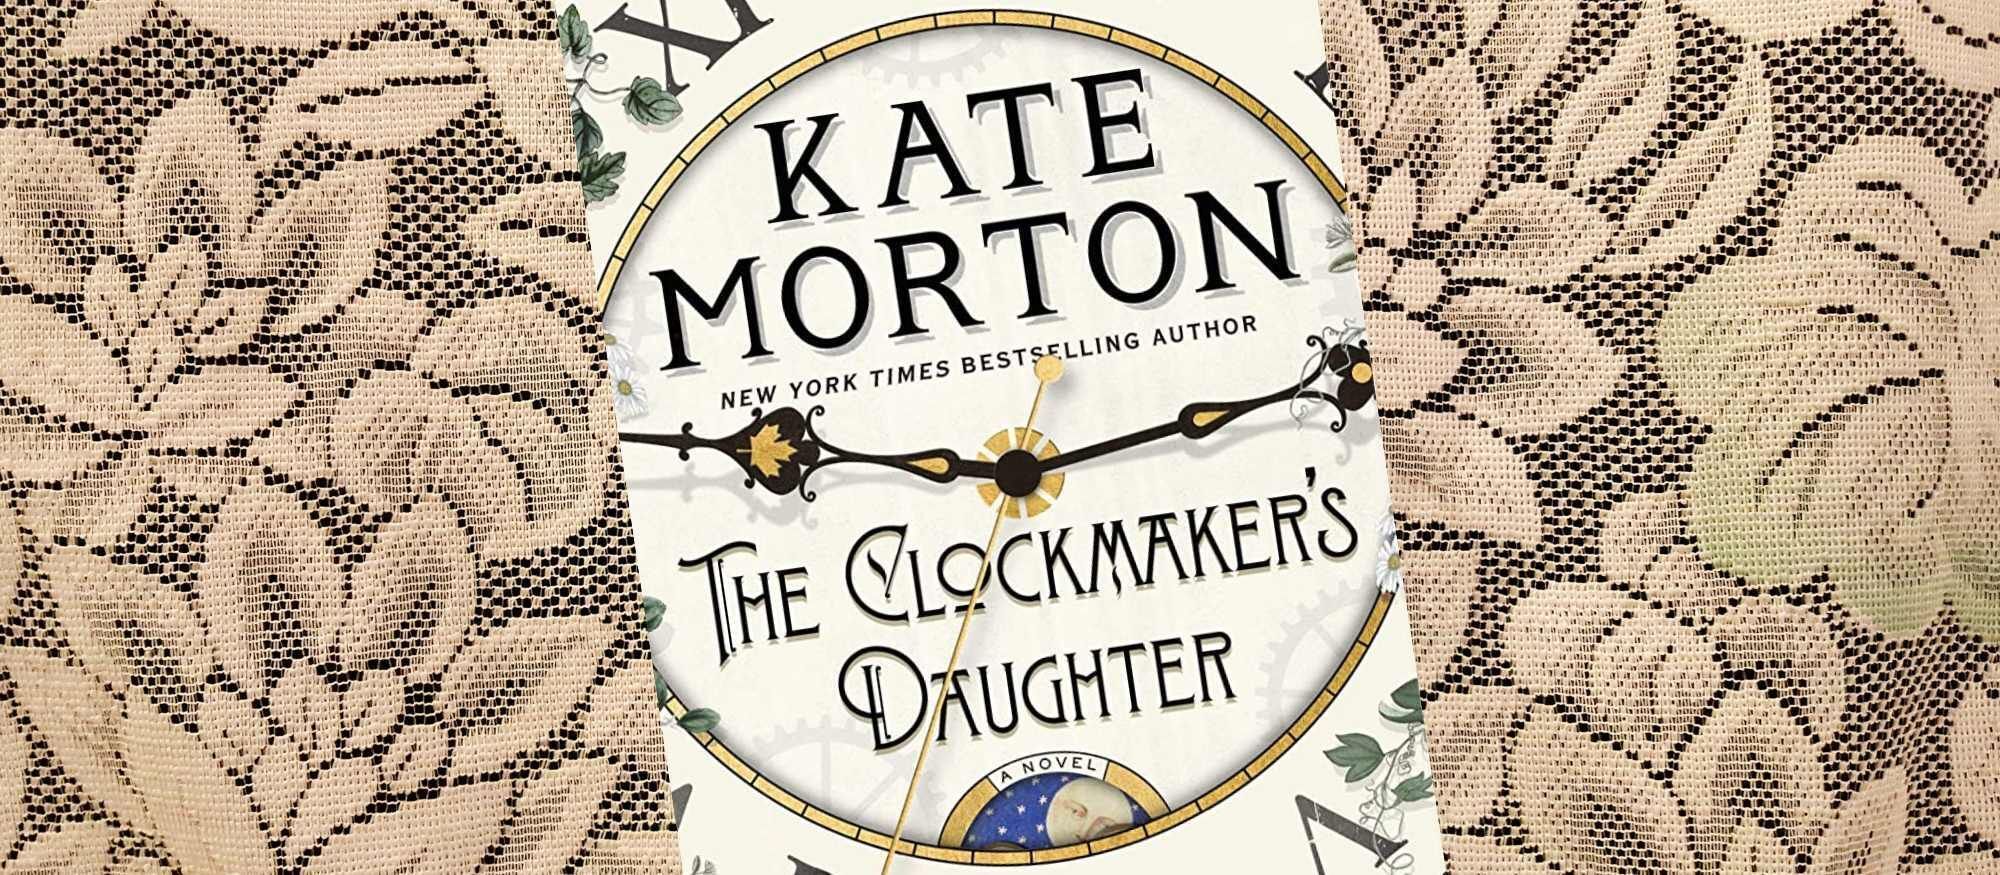 Federation Book Club reads The Clockmaker's Daughter